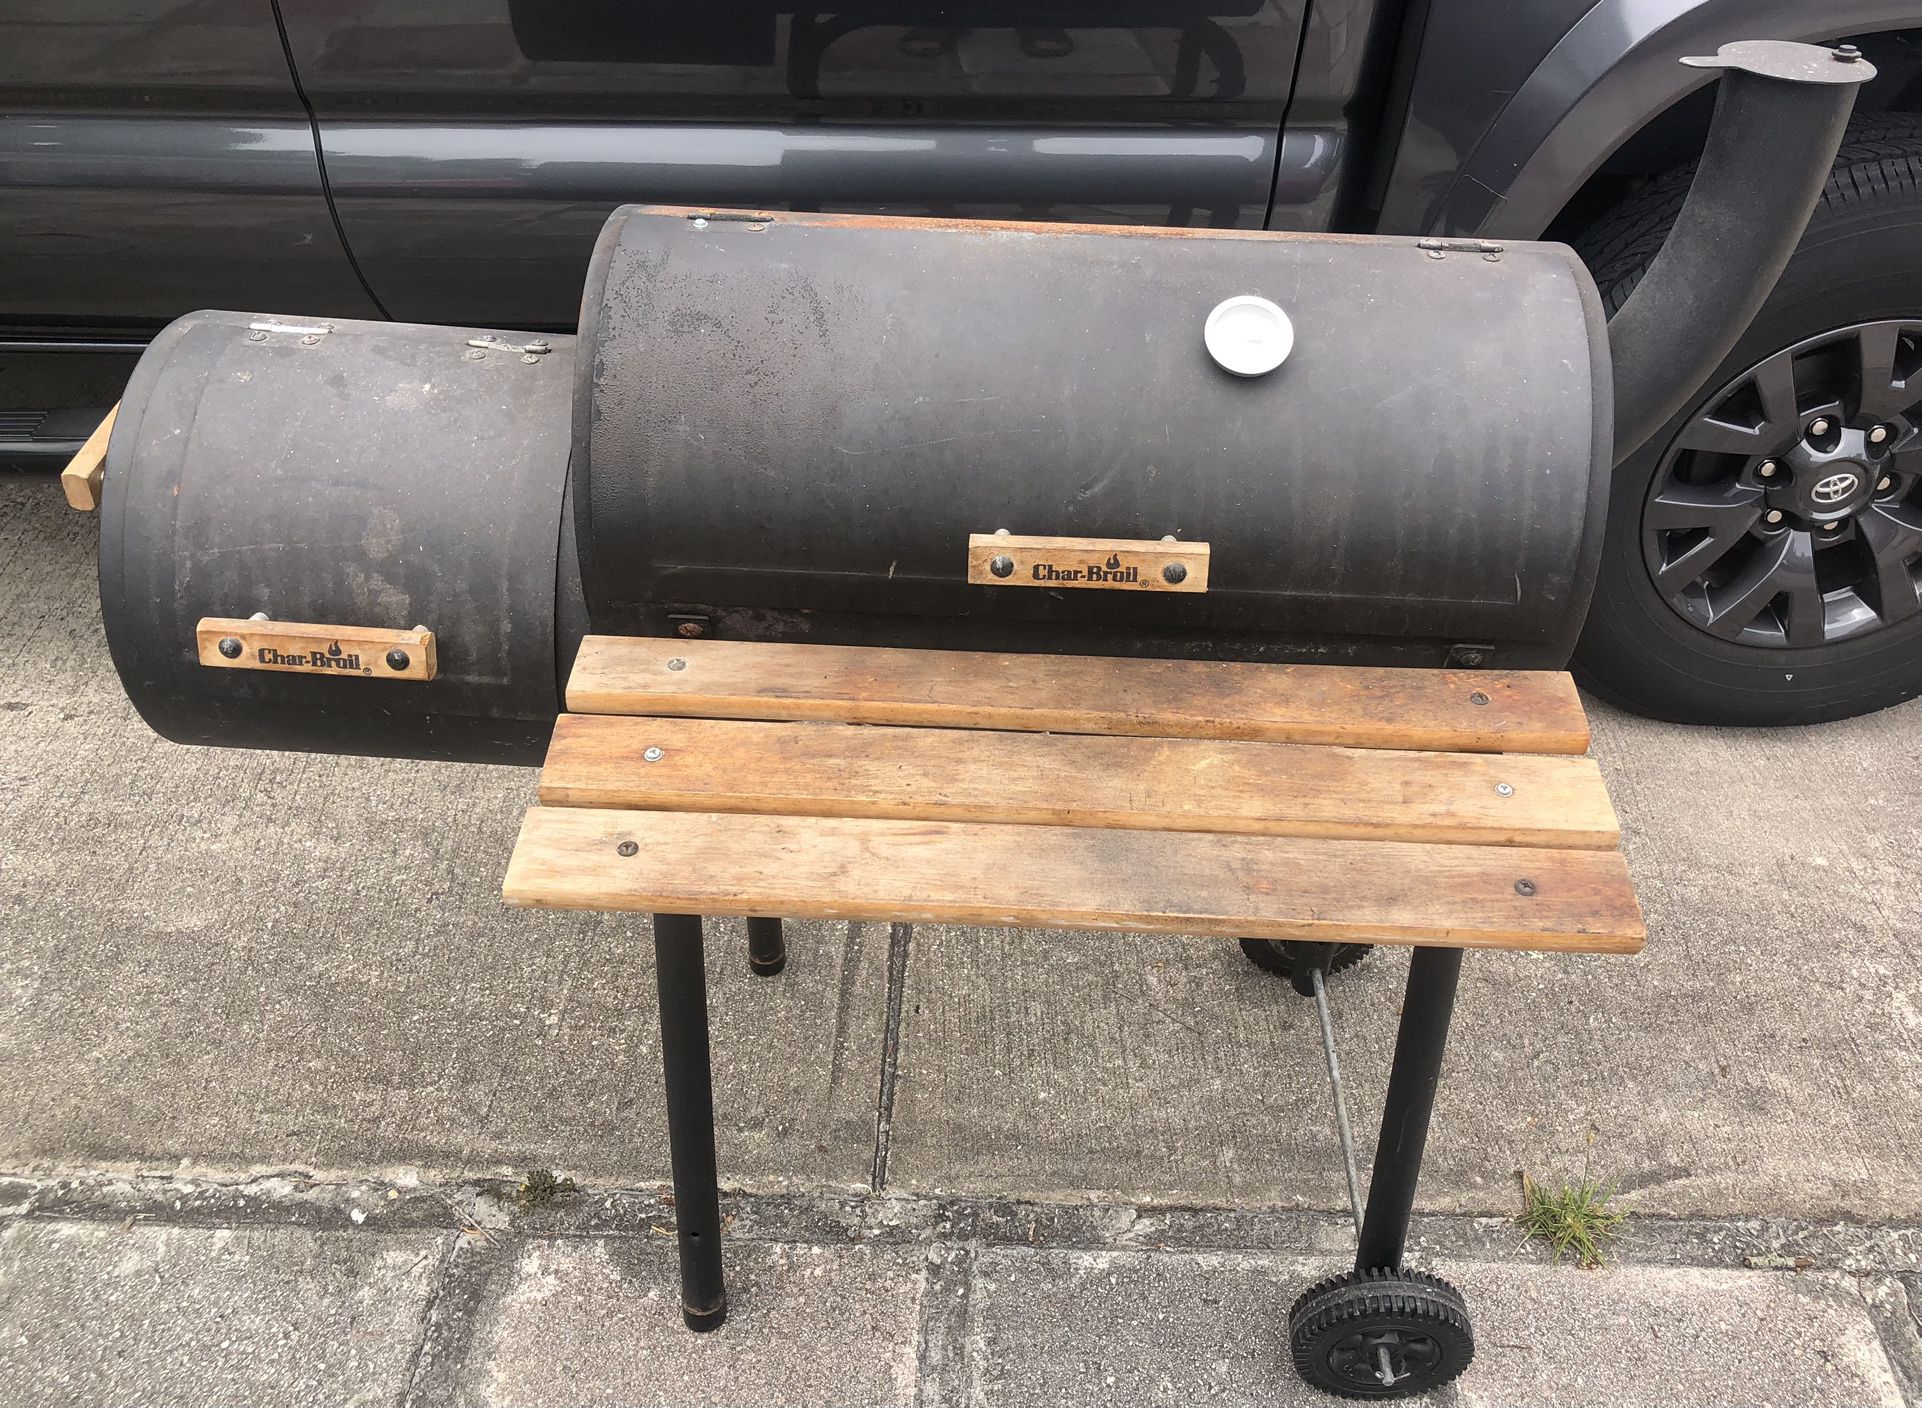 Char-Broil Charcoal Smoker Grill